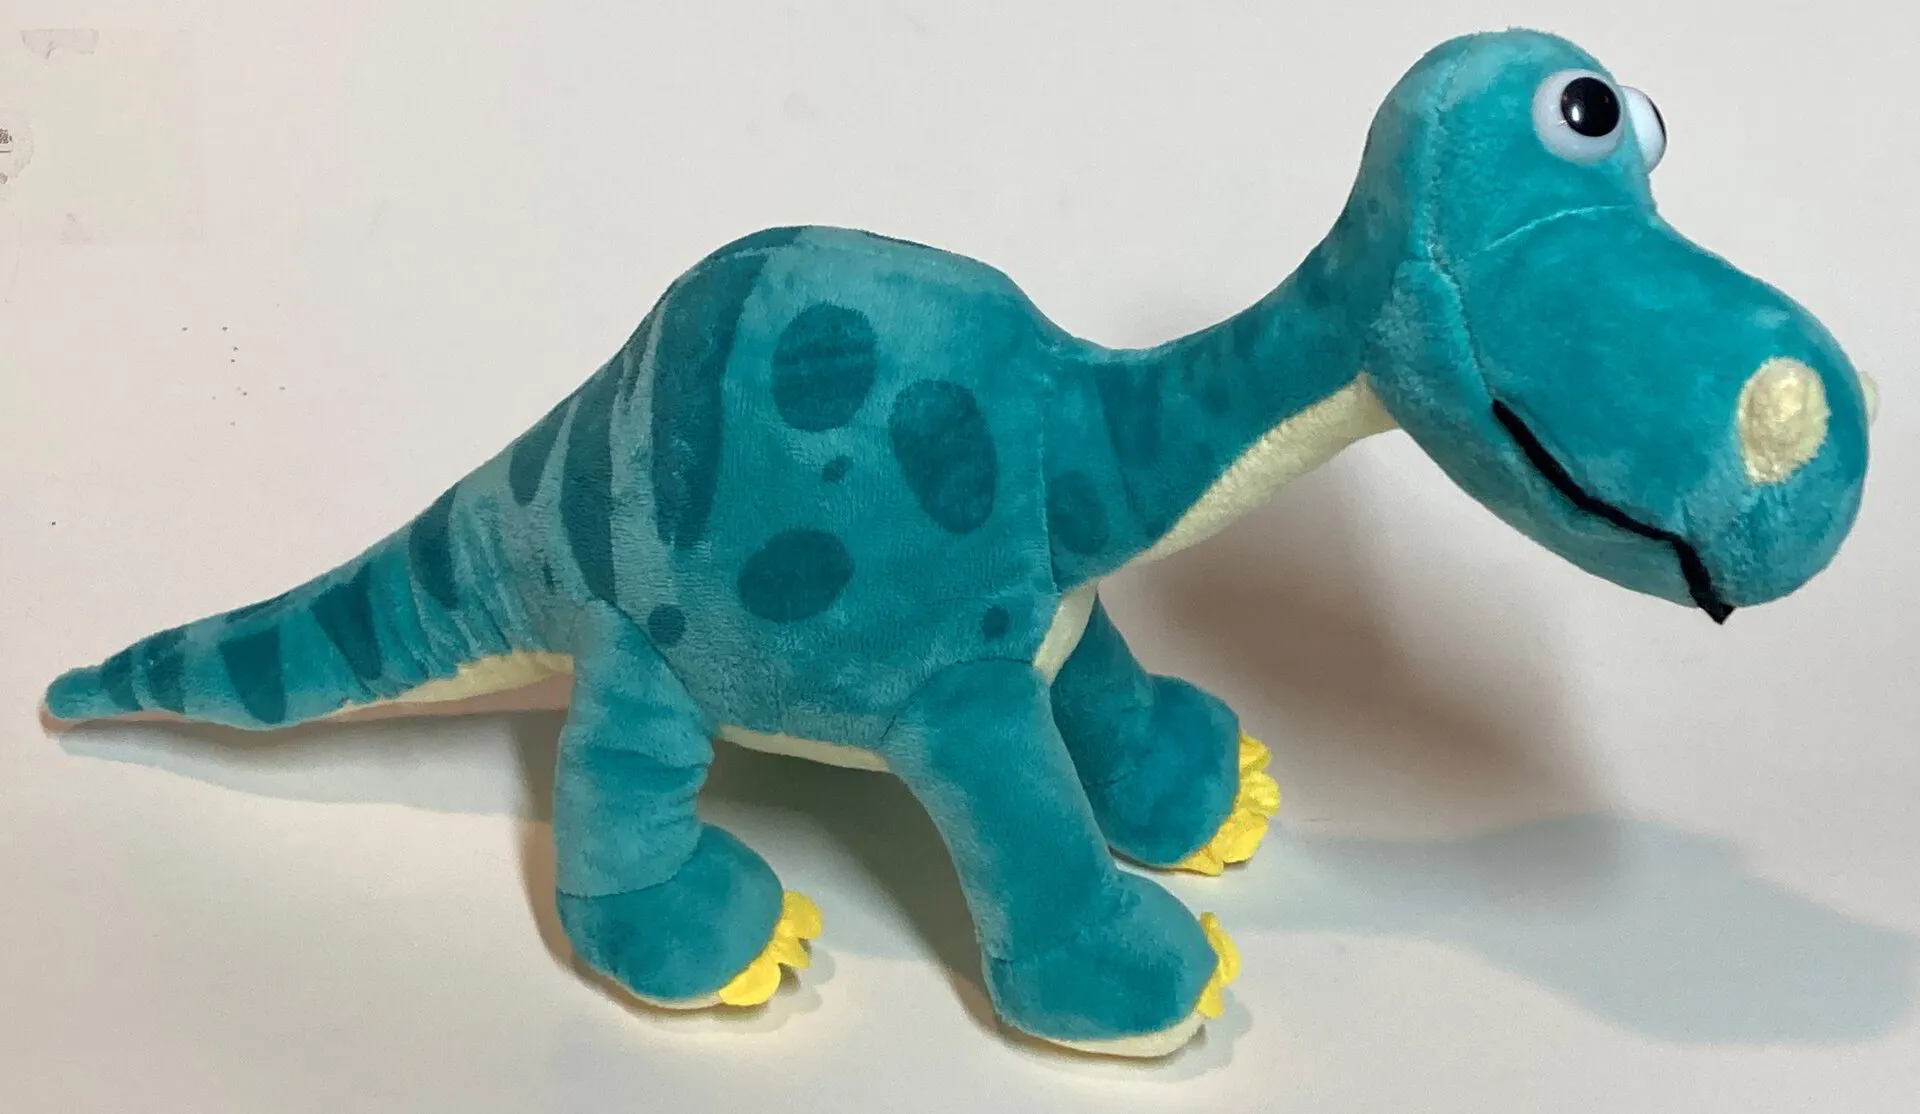 Blue Dino Toy - FREE SHIPPING!